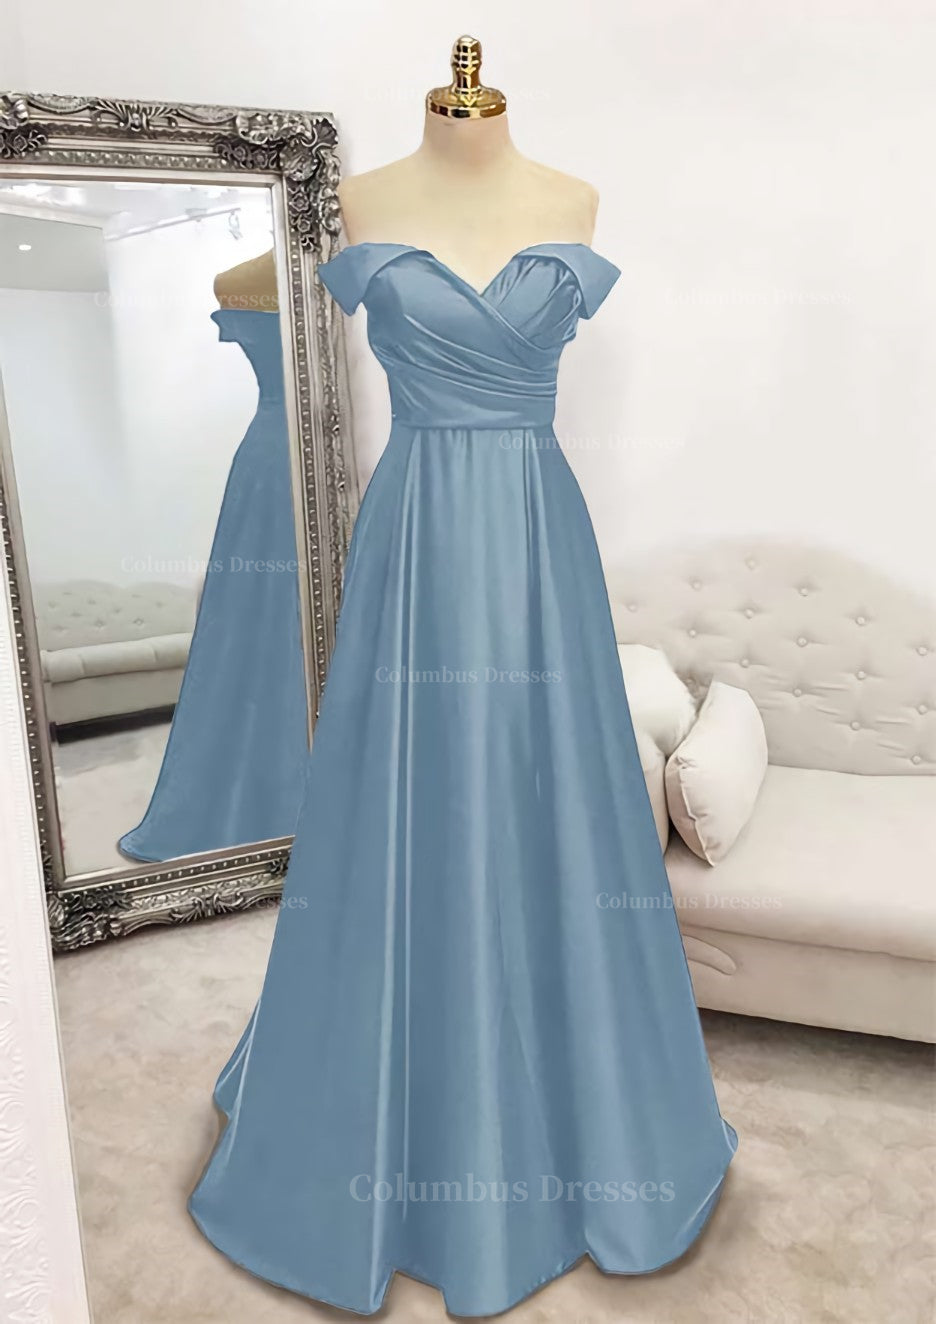 Bridesmaid Dresses Idea, A-line Off-the-Shoulder Sleeveless Long/Floor-Length Satin Prom Dress With Pleated